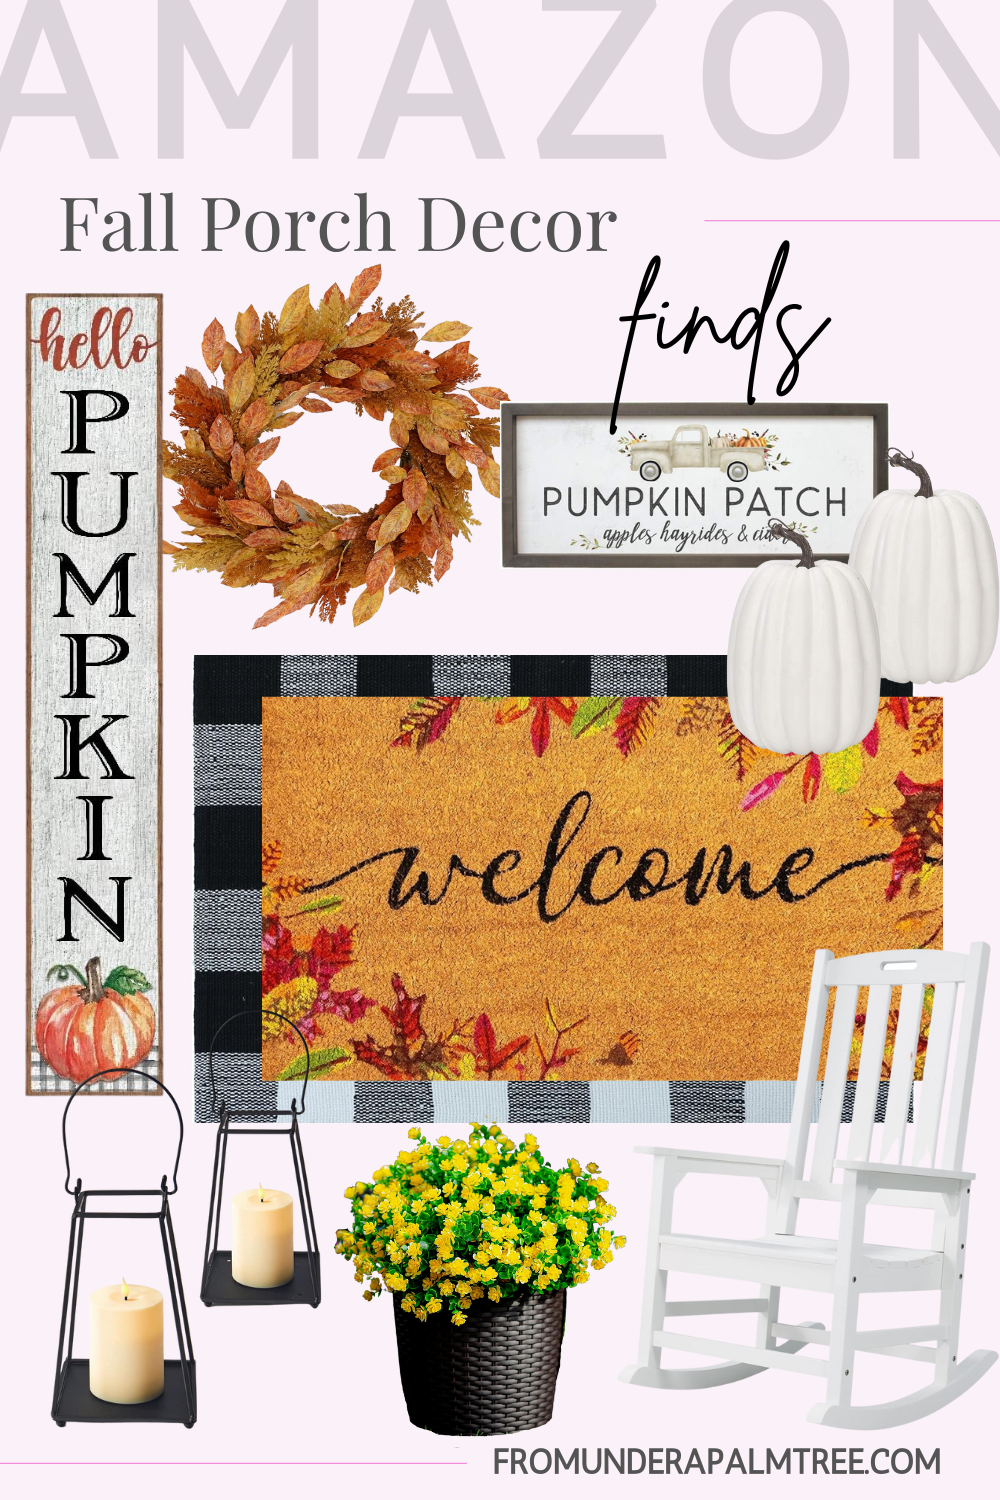 fall | fall porch decor | fall decor | front patio decor | amazon fall porch decor | amazon fall home capsule | amazon fall porch capsule | amazon finds | amazon fall finds | autumn decor | autumn porch decor | how to style my fall patio | how to style my fall porch, fall welcome mat | fall front door wreath | Fall wreath | fall porch signs | faux mums | fake mums | fall must haves | fall finds | fall haul | from under a palm tree | home decor |